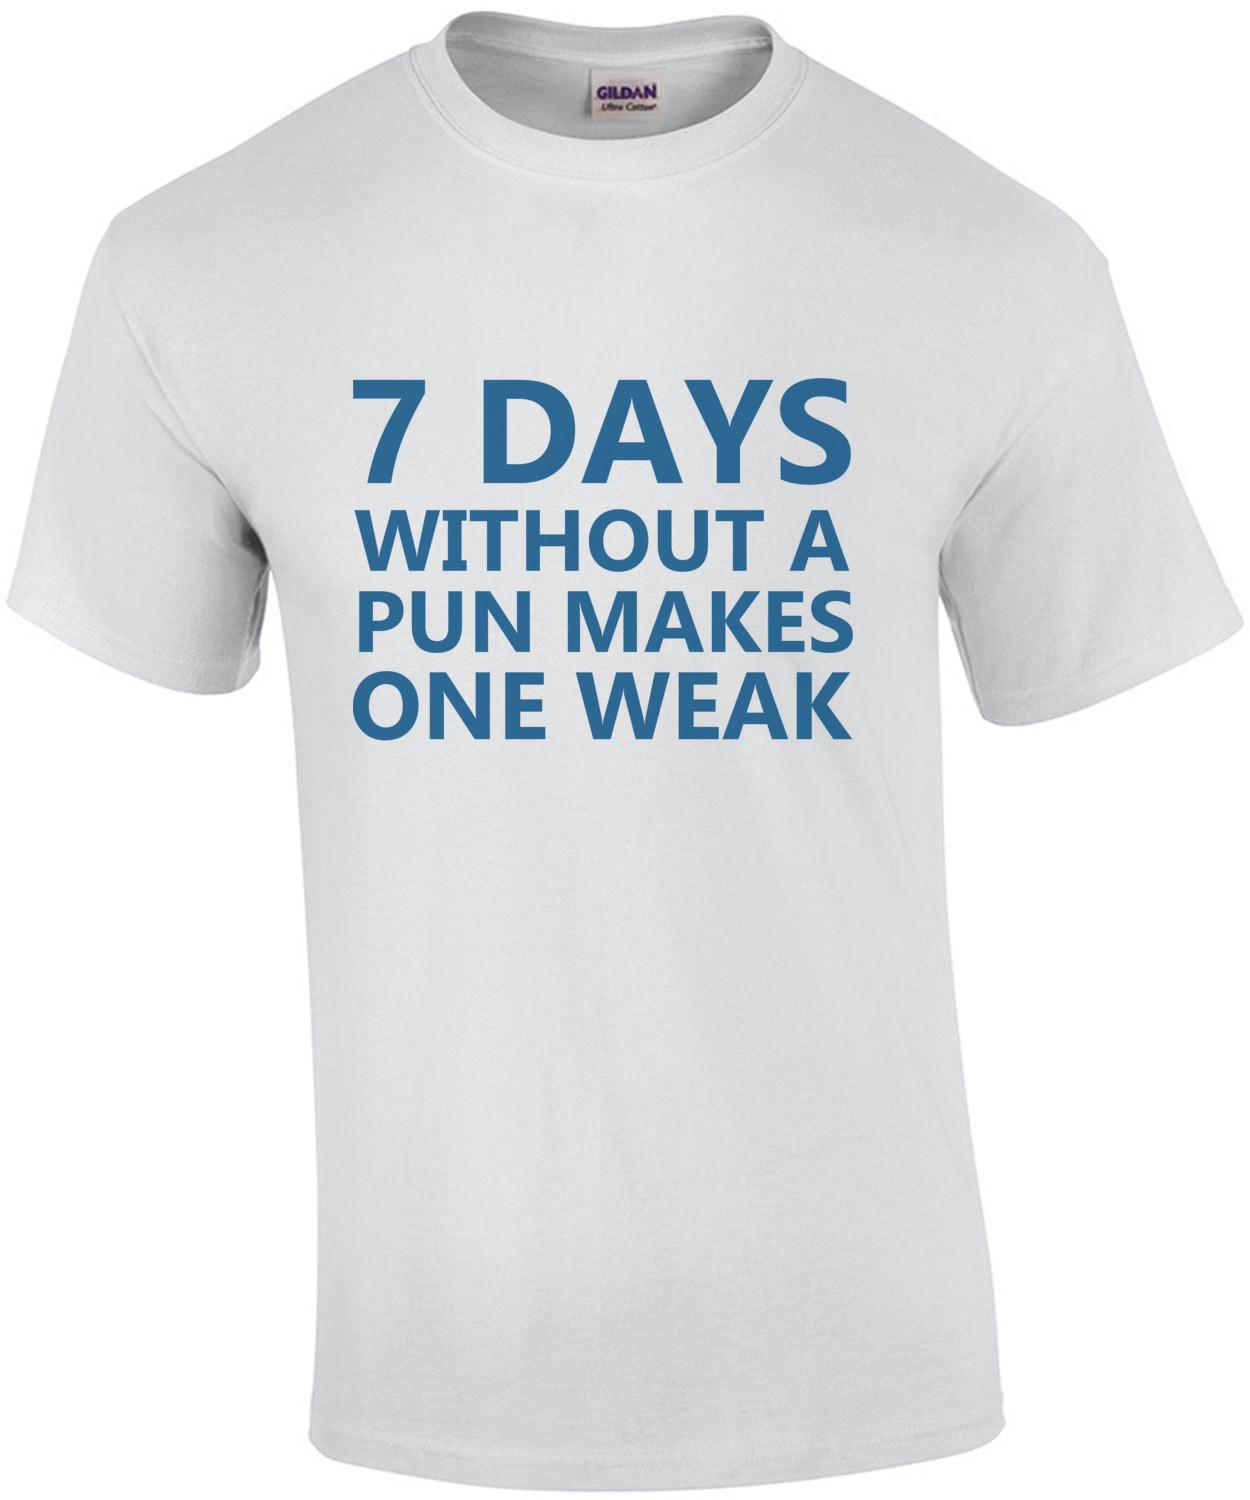 7 days without a pun makes one weak. - Funny Pun